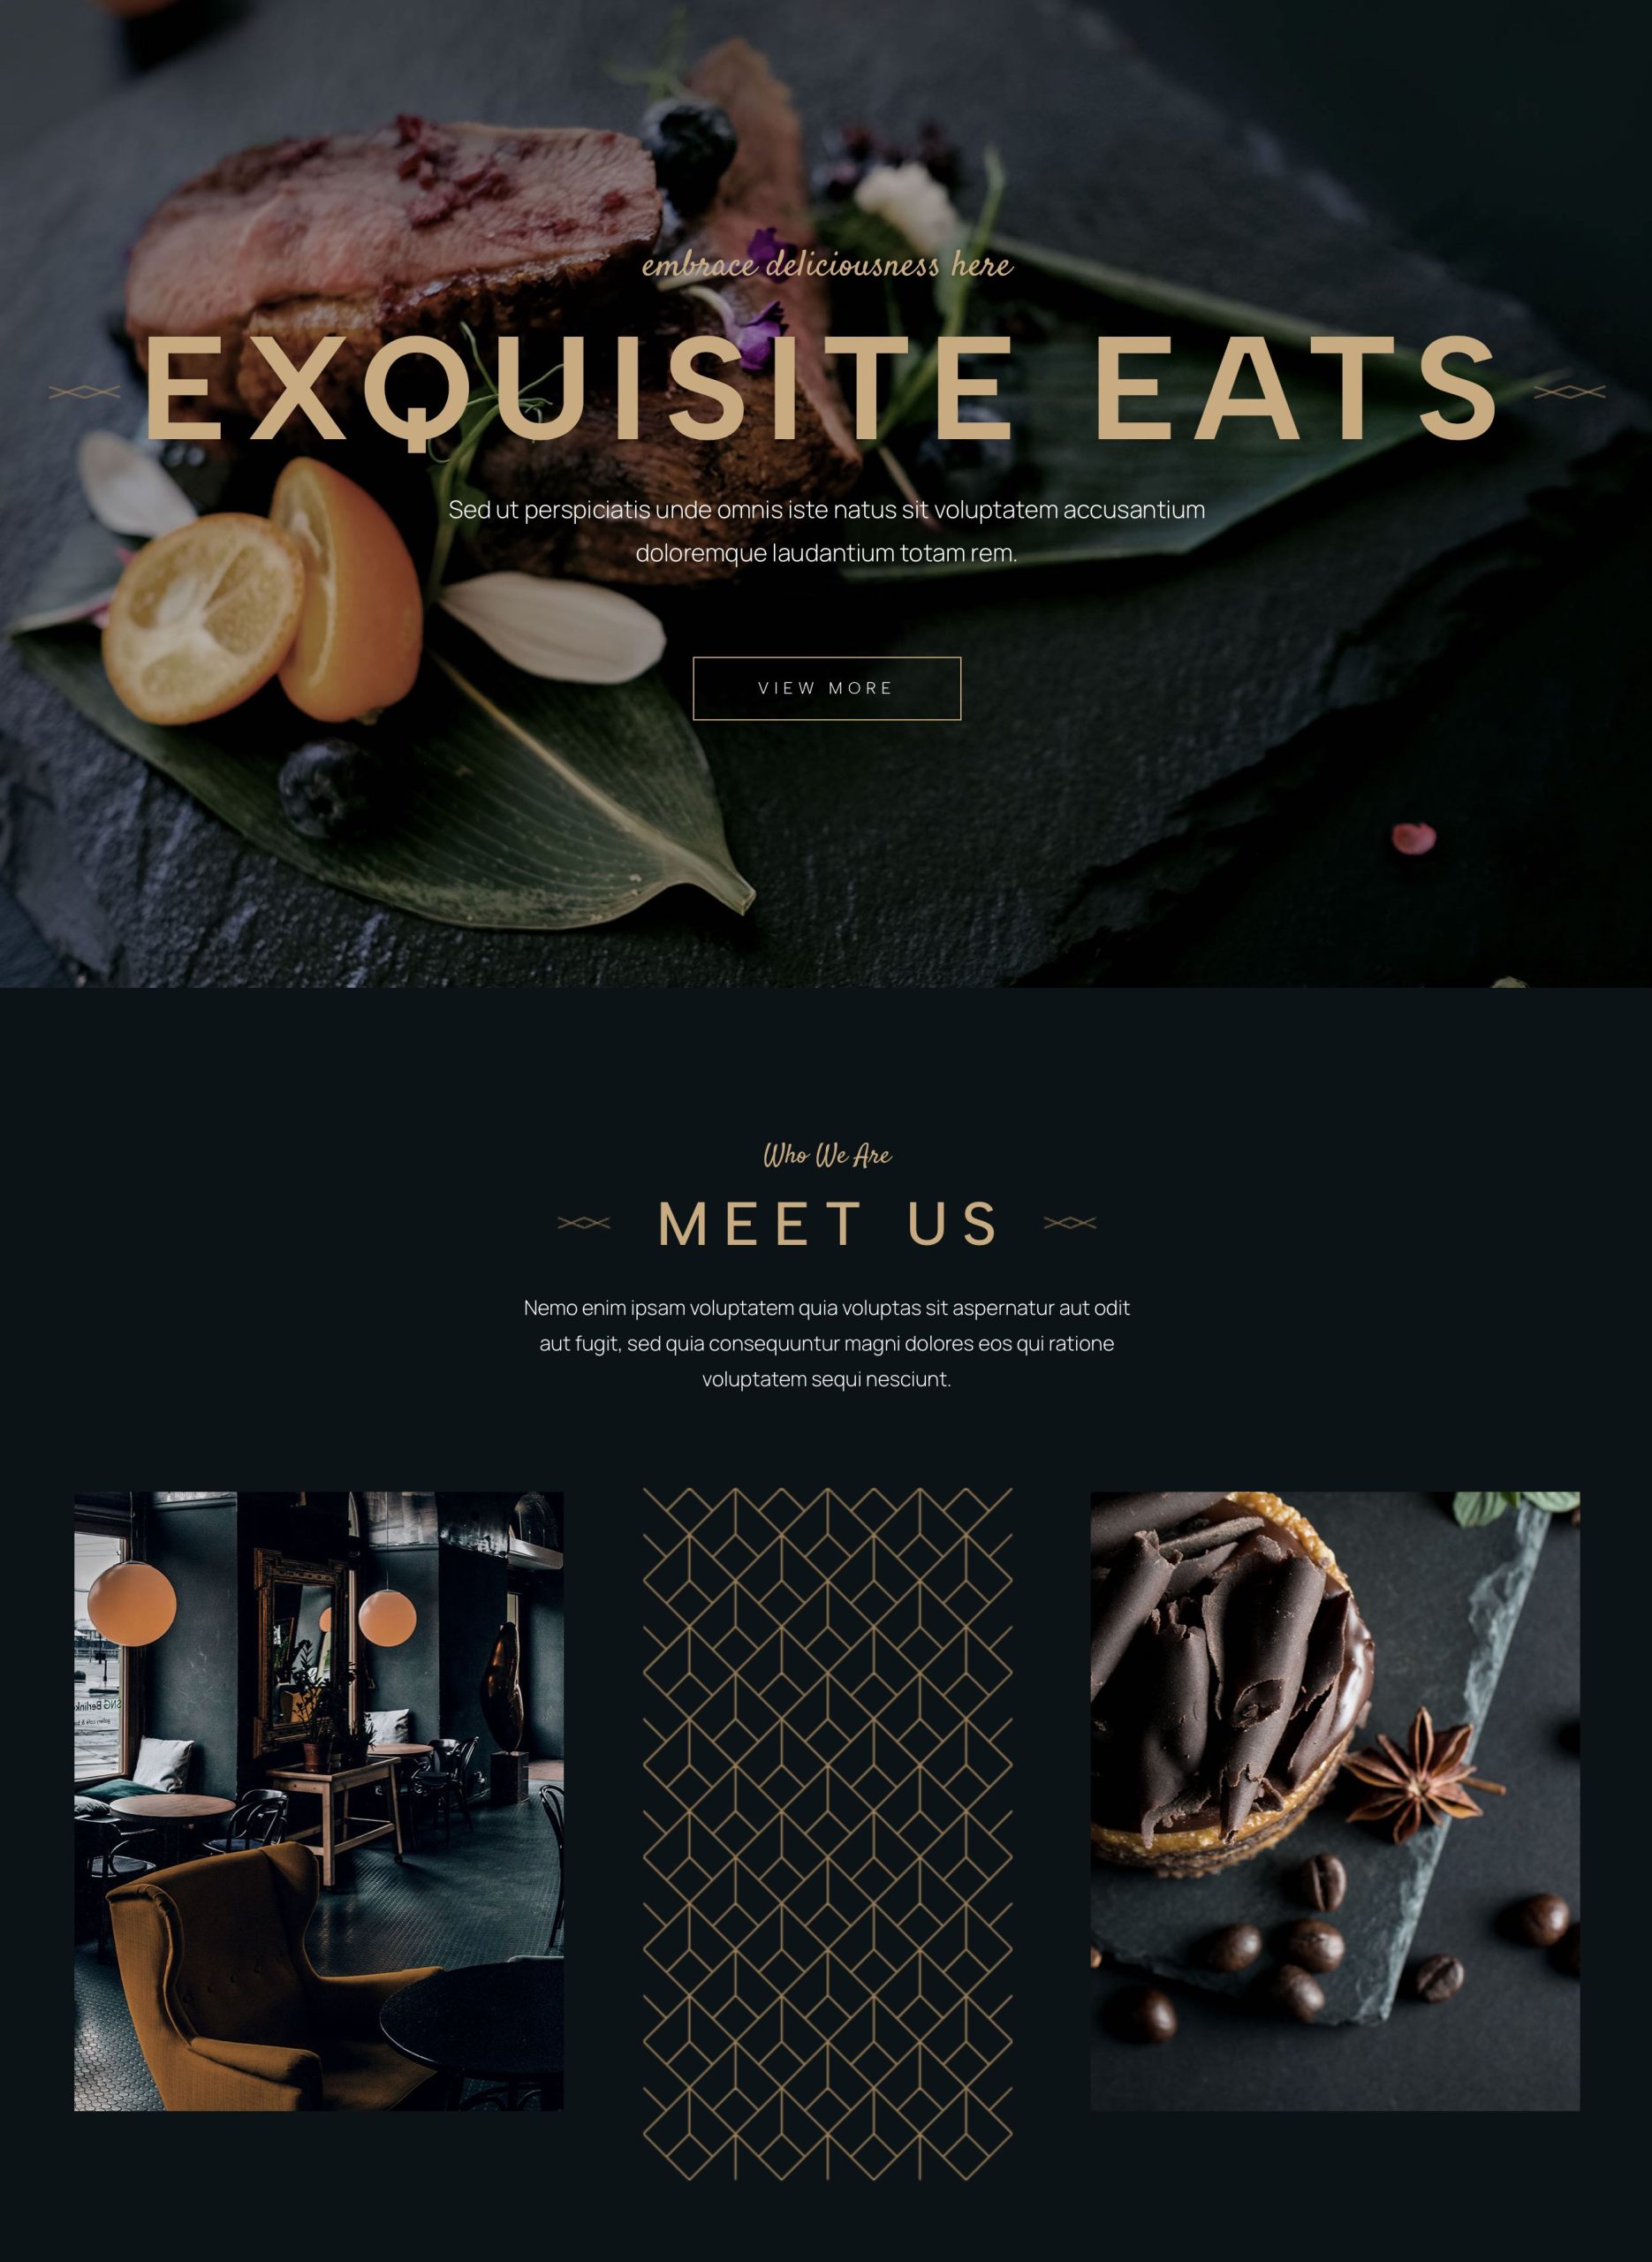 Revamp Your Restaurant's Online Presence with a Low-Cost Restaurant Website Using Divi Theme